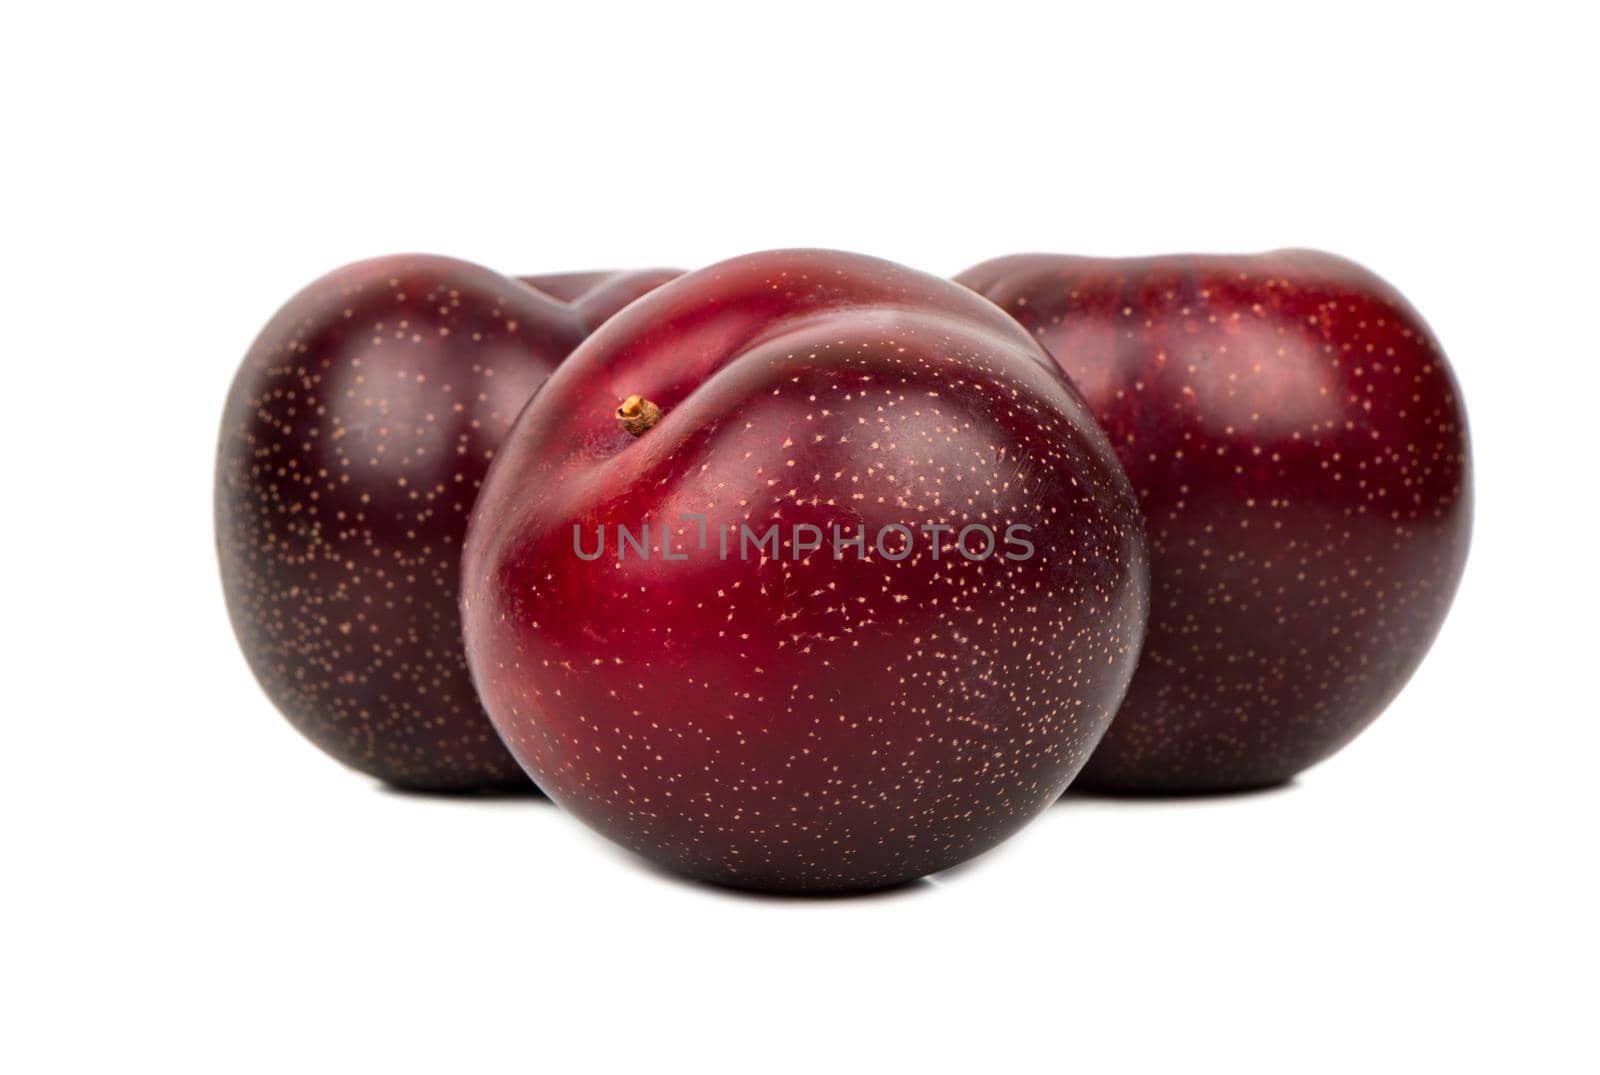 Three ripe large red plums on white background